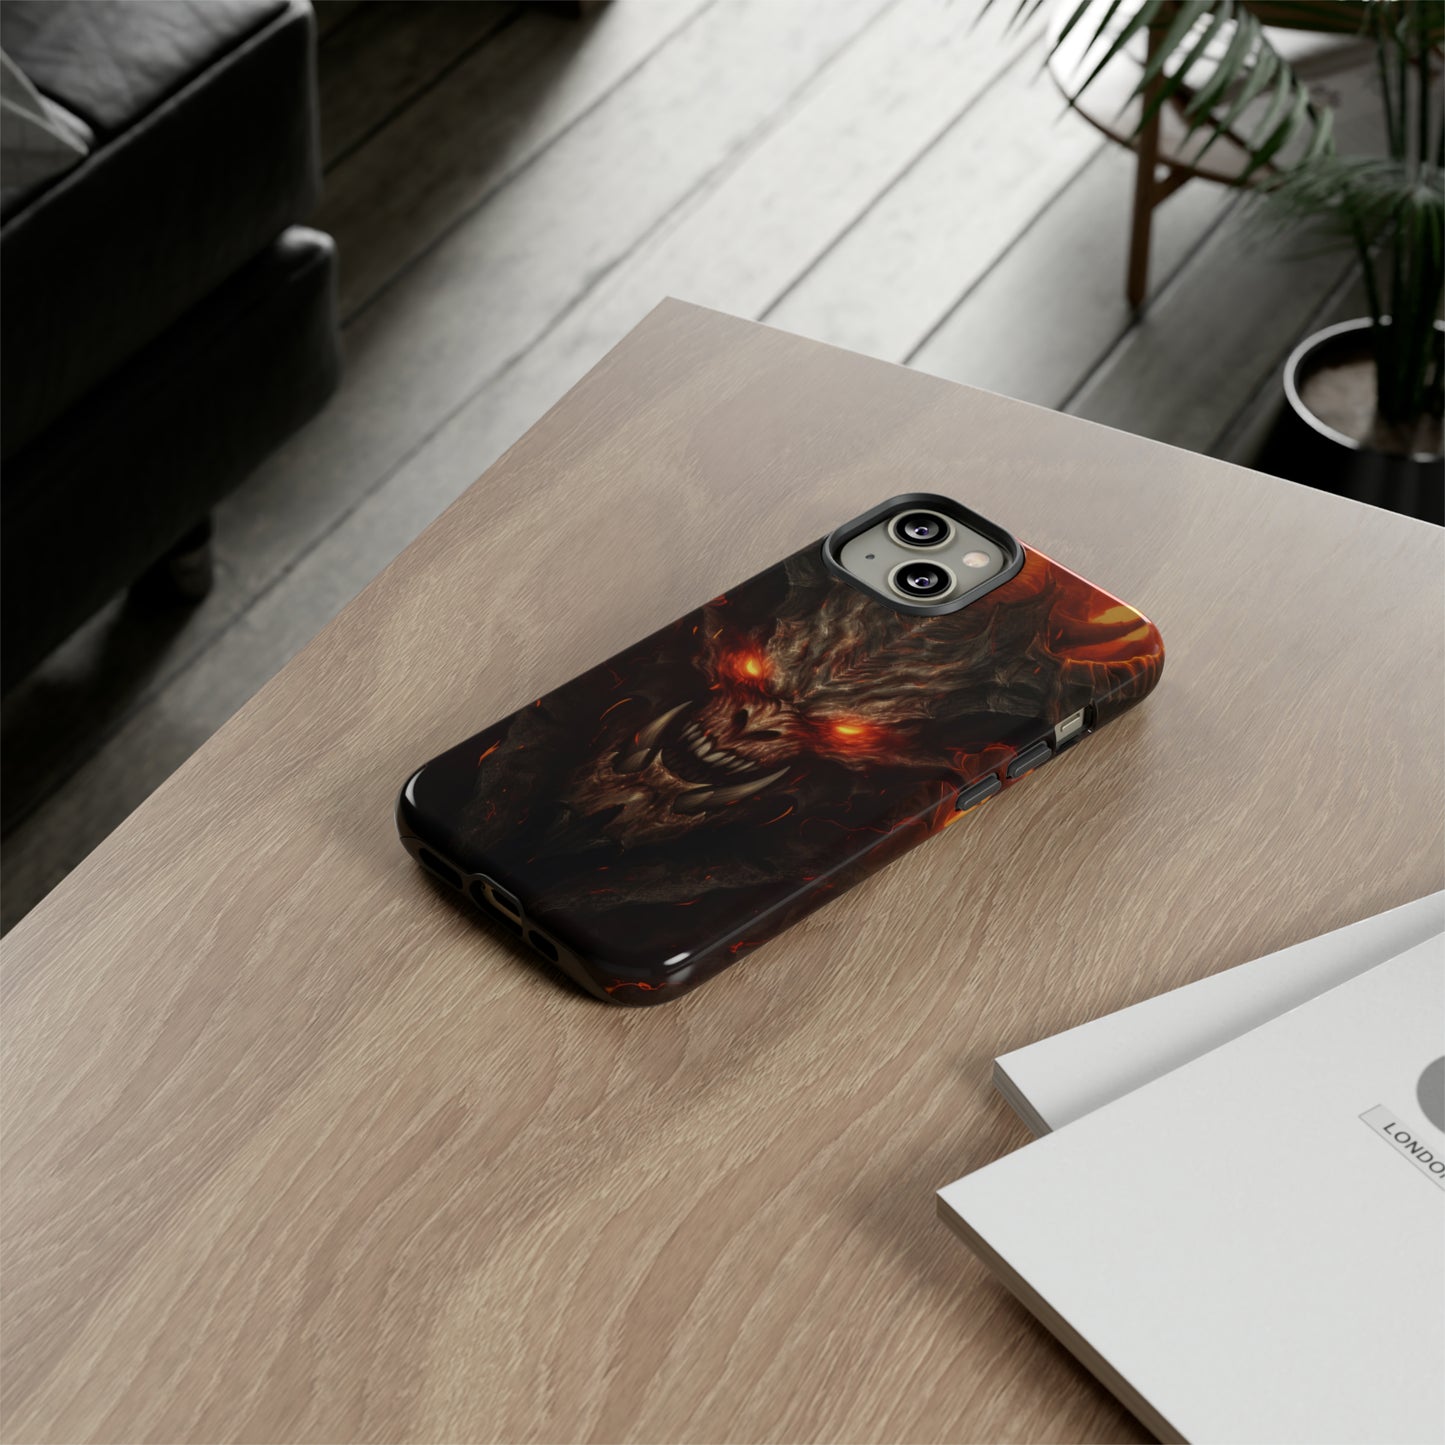 Inferno Dragon's Visage: Glowing Scales Phone Case for iPhone, Samsung, Pixel